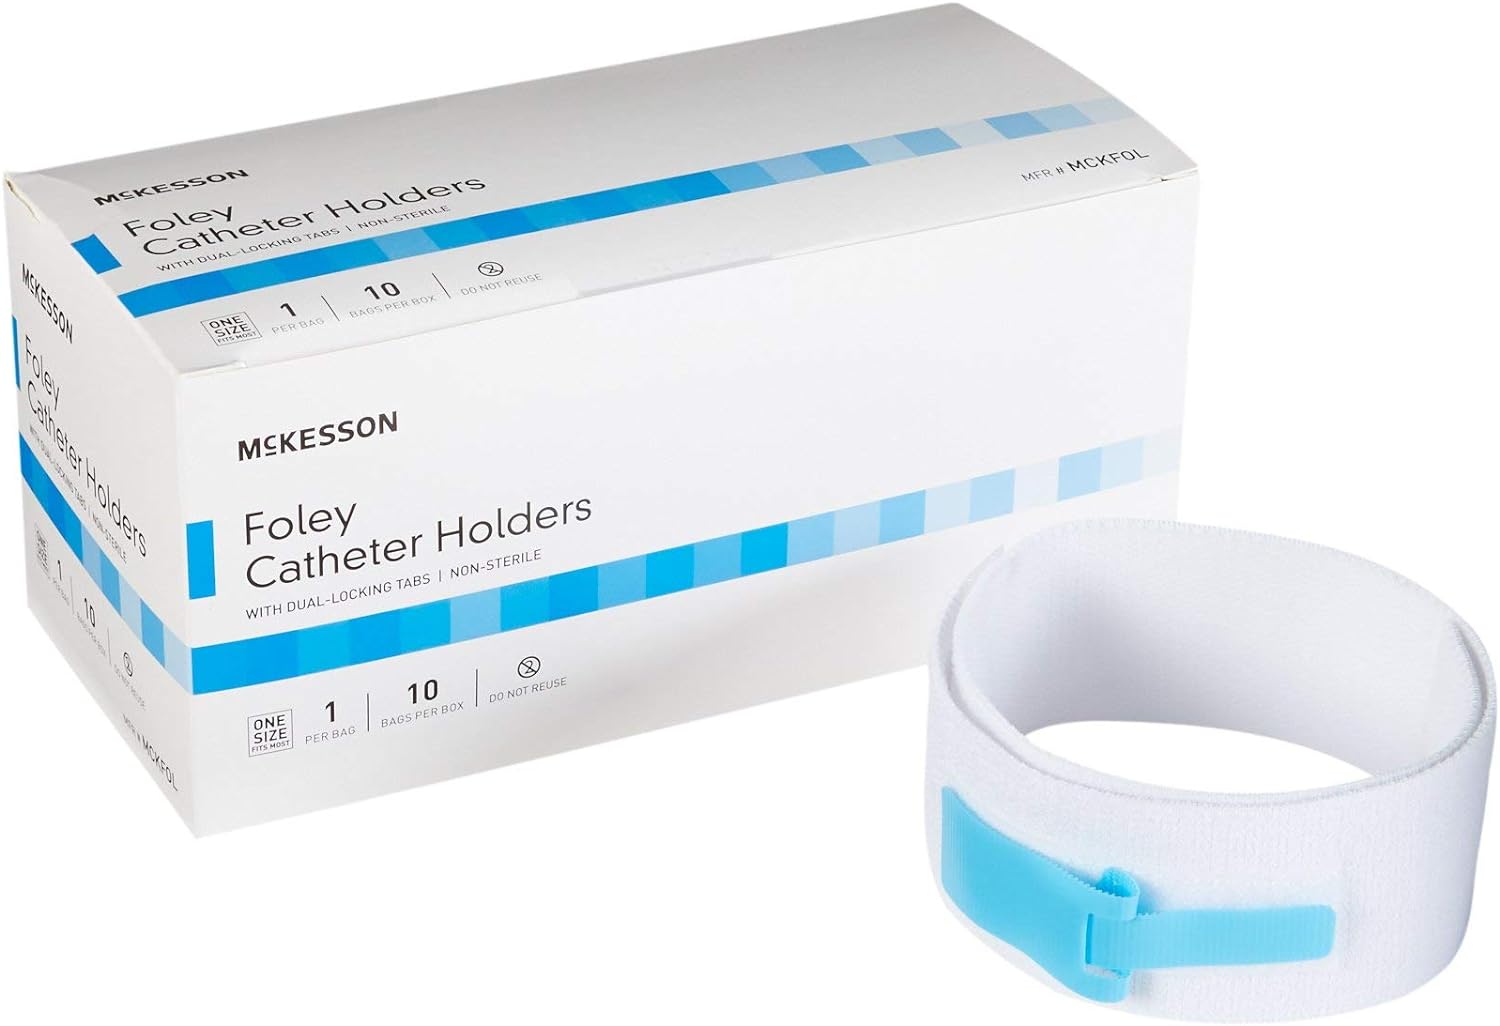 McKesson Foley Catheter Tube Holder with Dual-Locking Tabs - Urinary Leg Band Holder, 1 Count